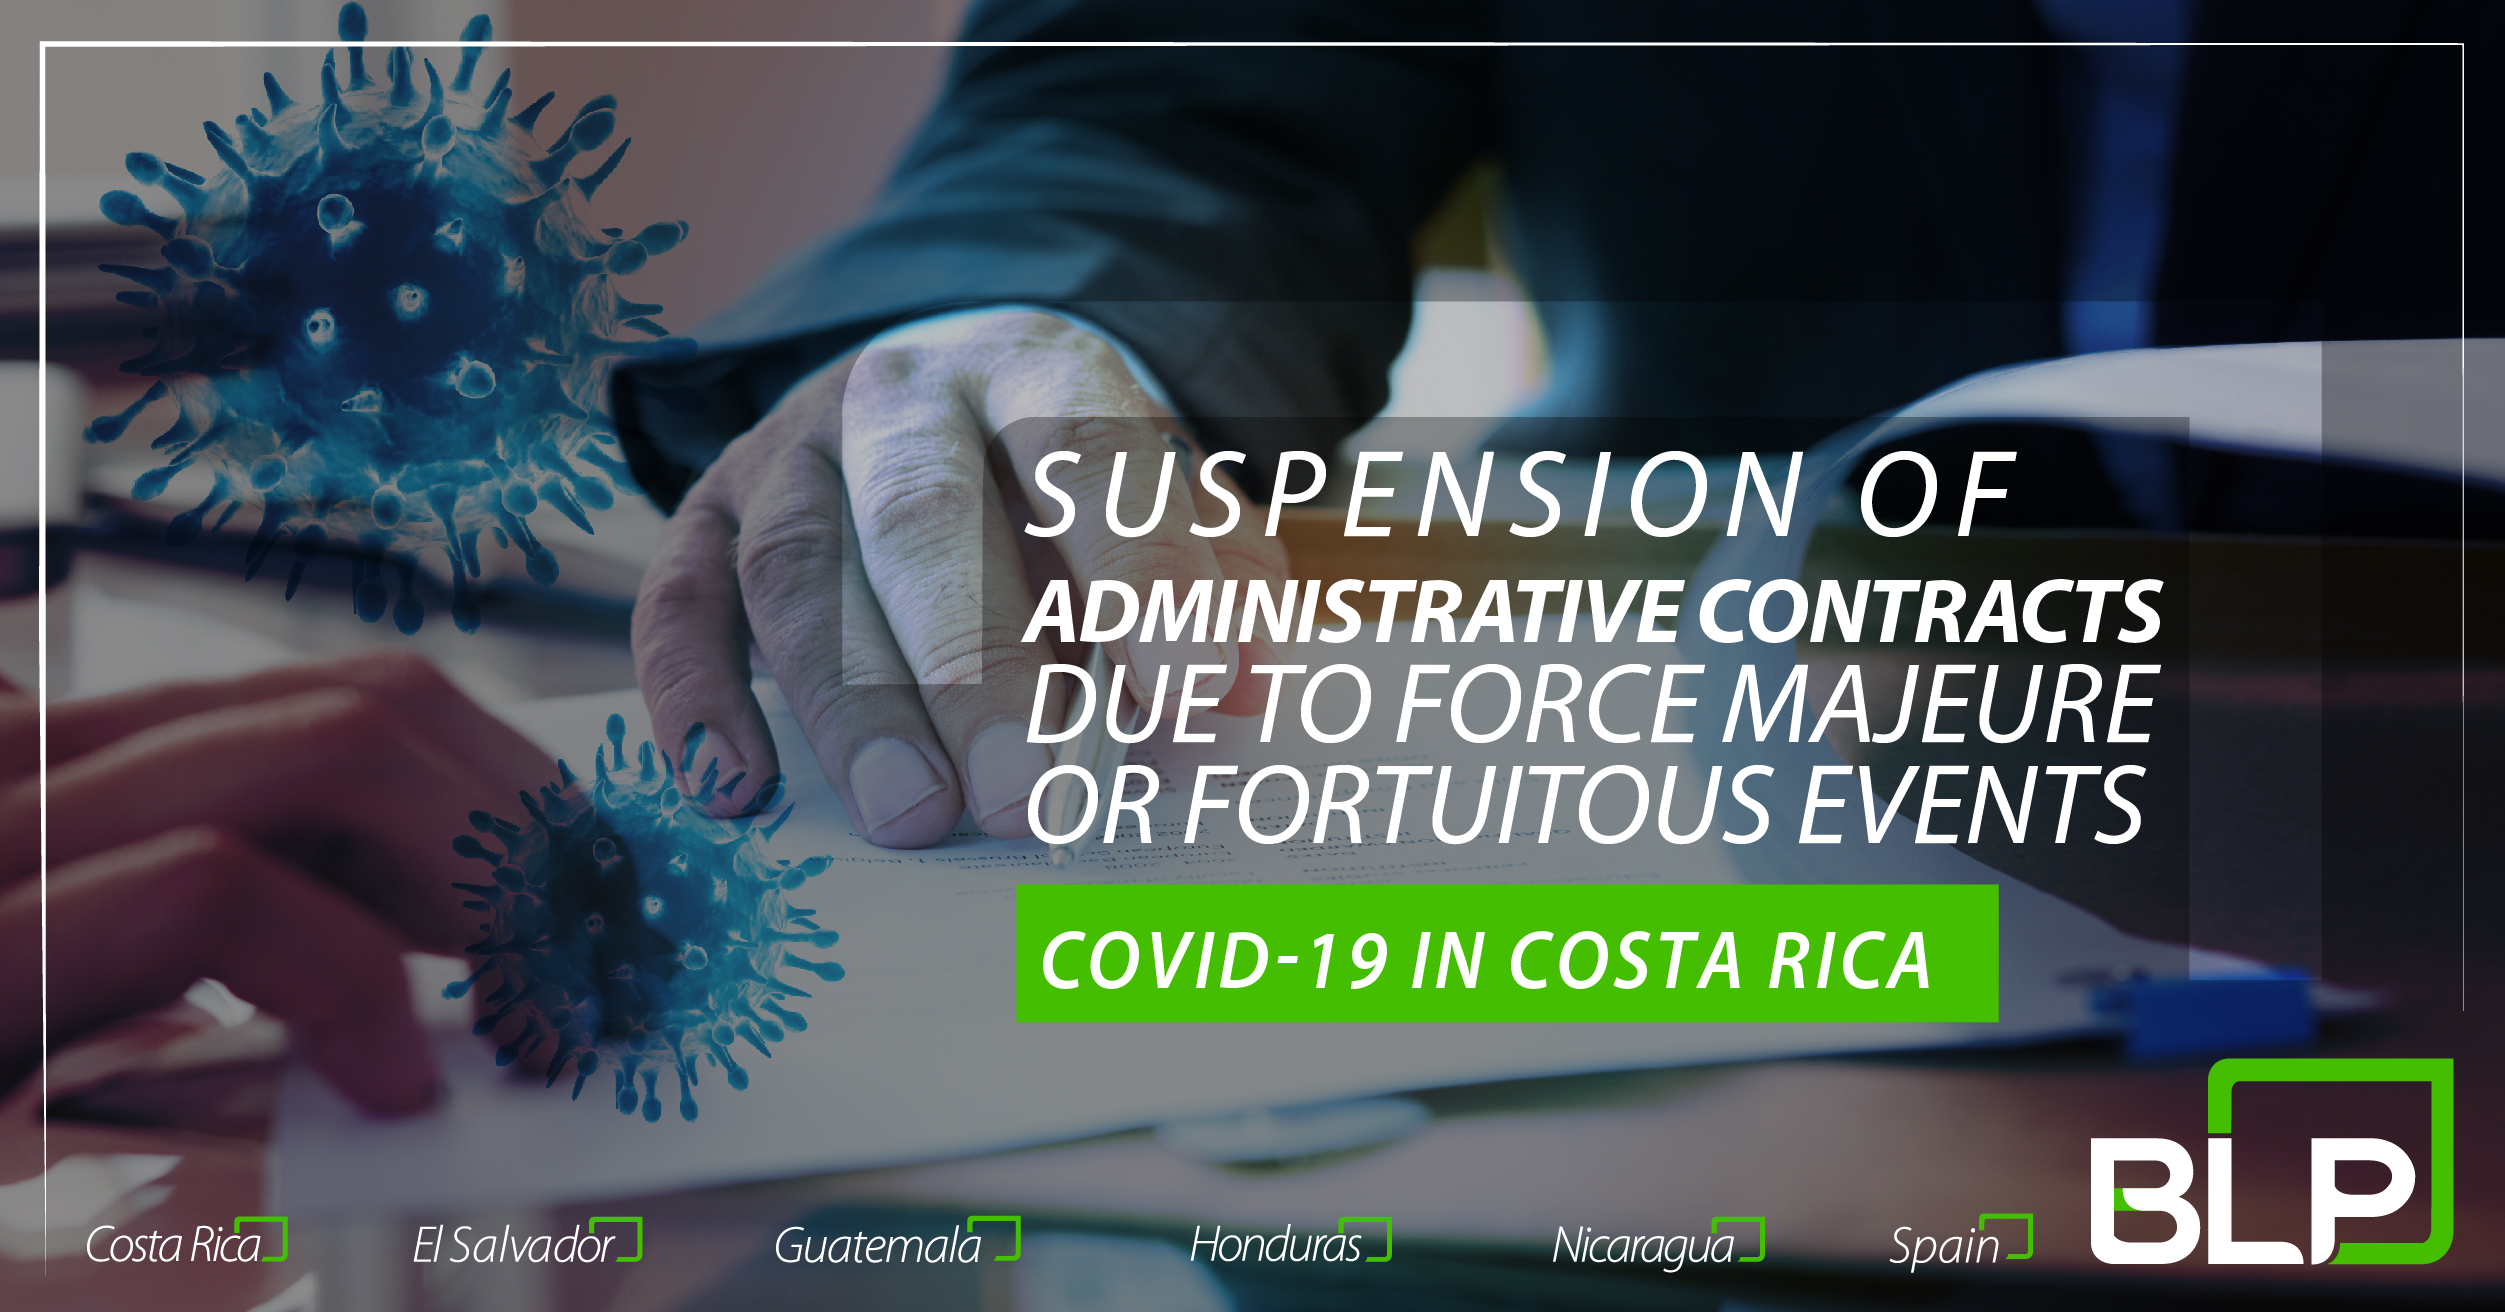 Suspension of Administrative Contracts due to force majeure or fortuitous event.